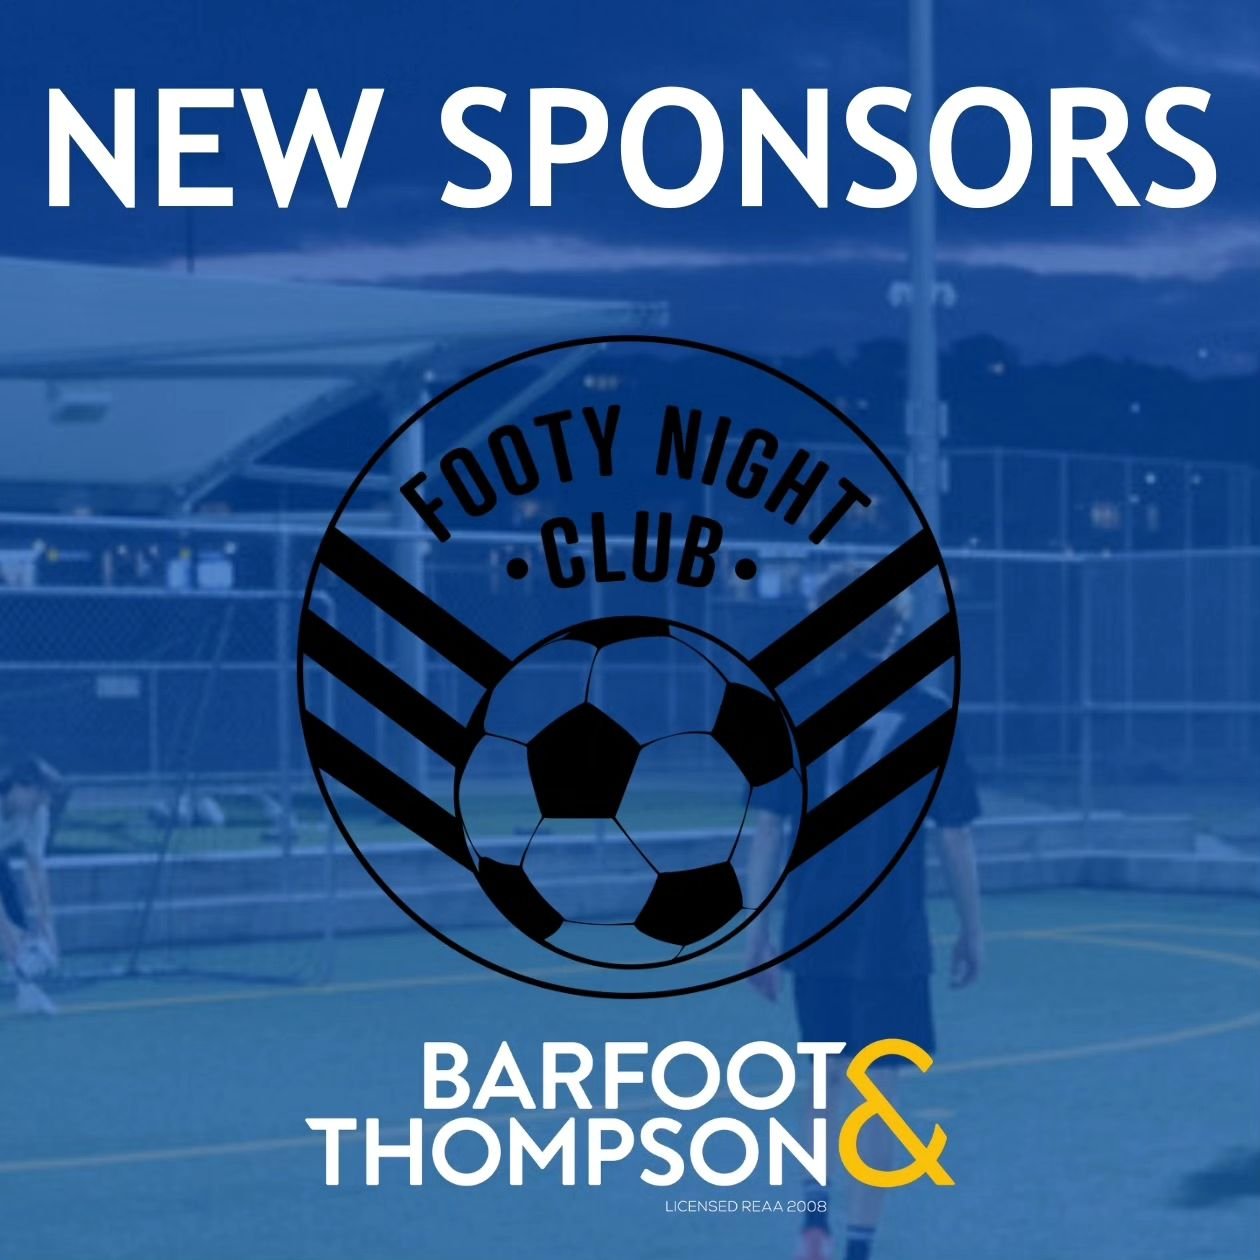 We are pleased to announce the exciting news of our new platinum sponsors @ritaoliver_realestate and @stephen_reed_real_estate_ !

Two phenomenal real estate agents from @barfootthompson that are happy to support Footy Night Club for the year and see